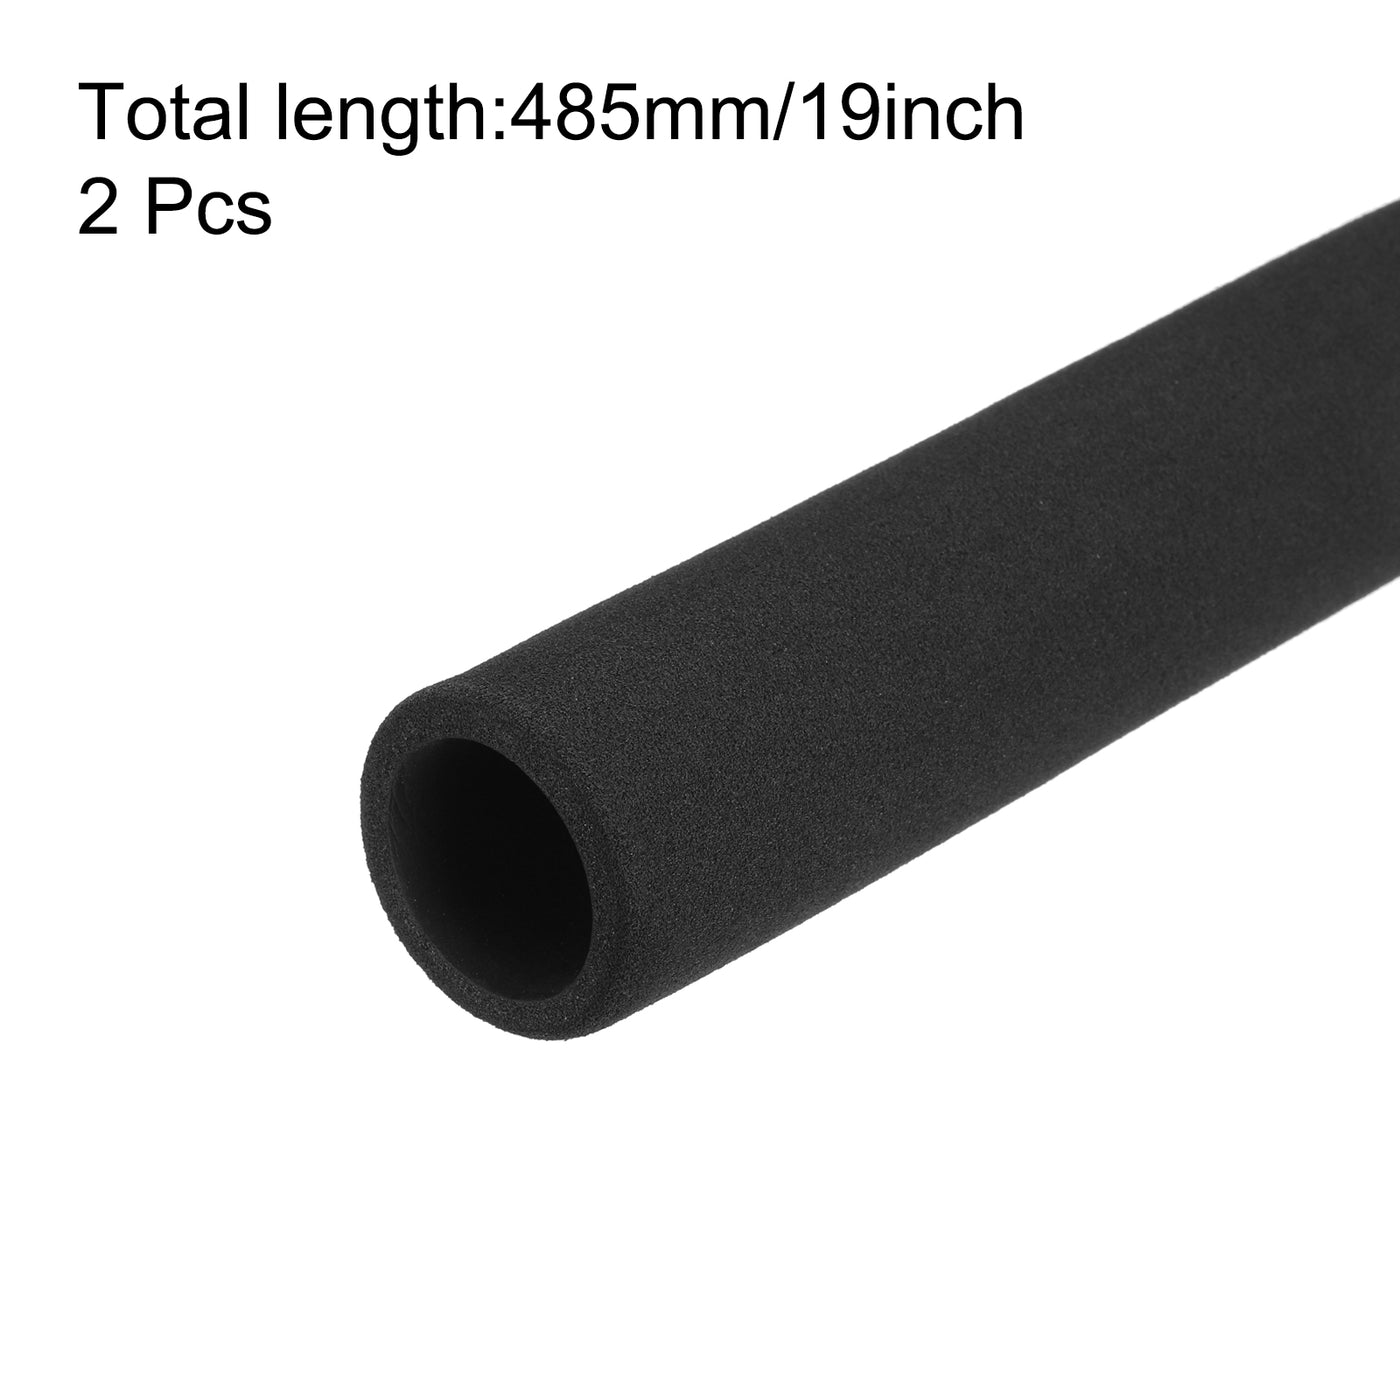 uxcell Uxcell Pipe Insulation Tube Foam Tubing for Handle Grip Support 24mm ID 34mm OD 485mm Heat Preservation Black 2pcs